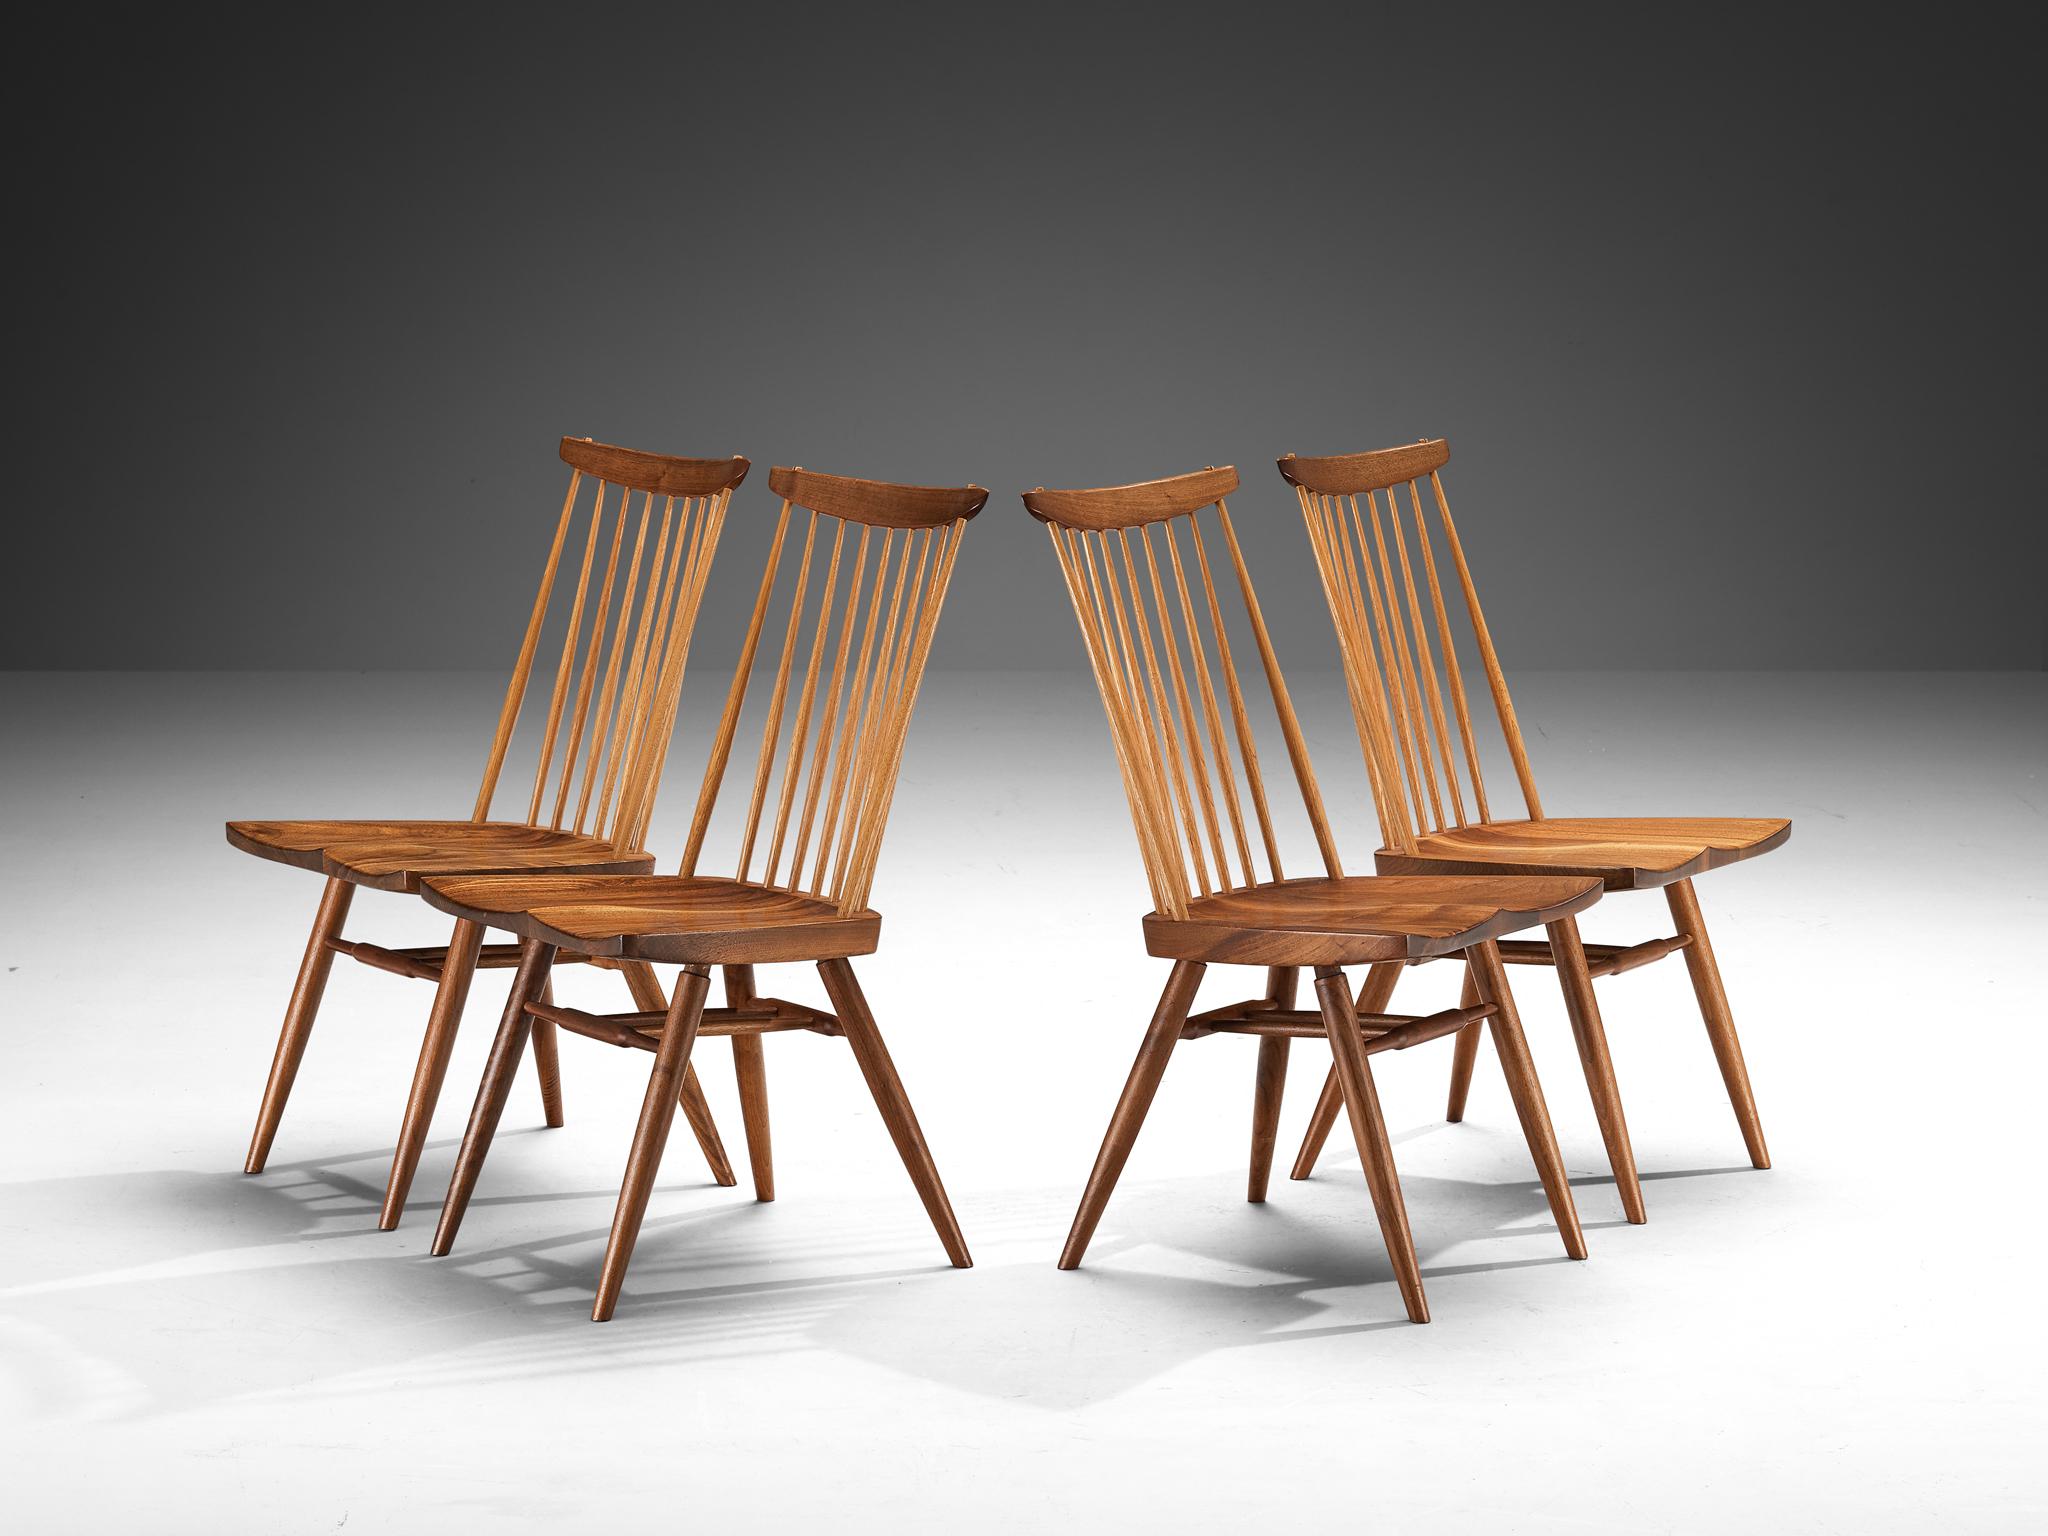 George Nakashima, ‘New’ dining chairs, American black walnut, hickory, United States, 1975 

With regard to its essential form, material use, and woodwork, this ‘New’ dining chair is a testimony to George Nakashima's expert craftsmanship and